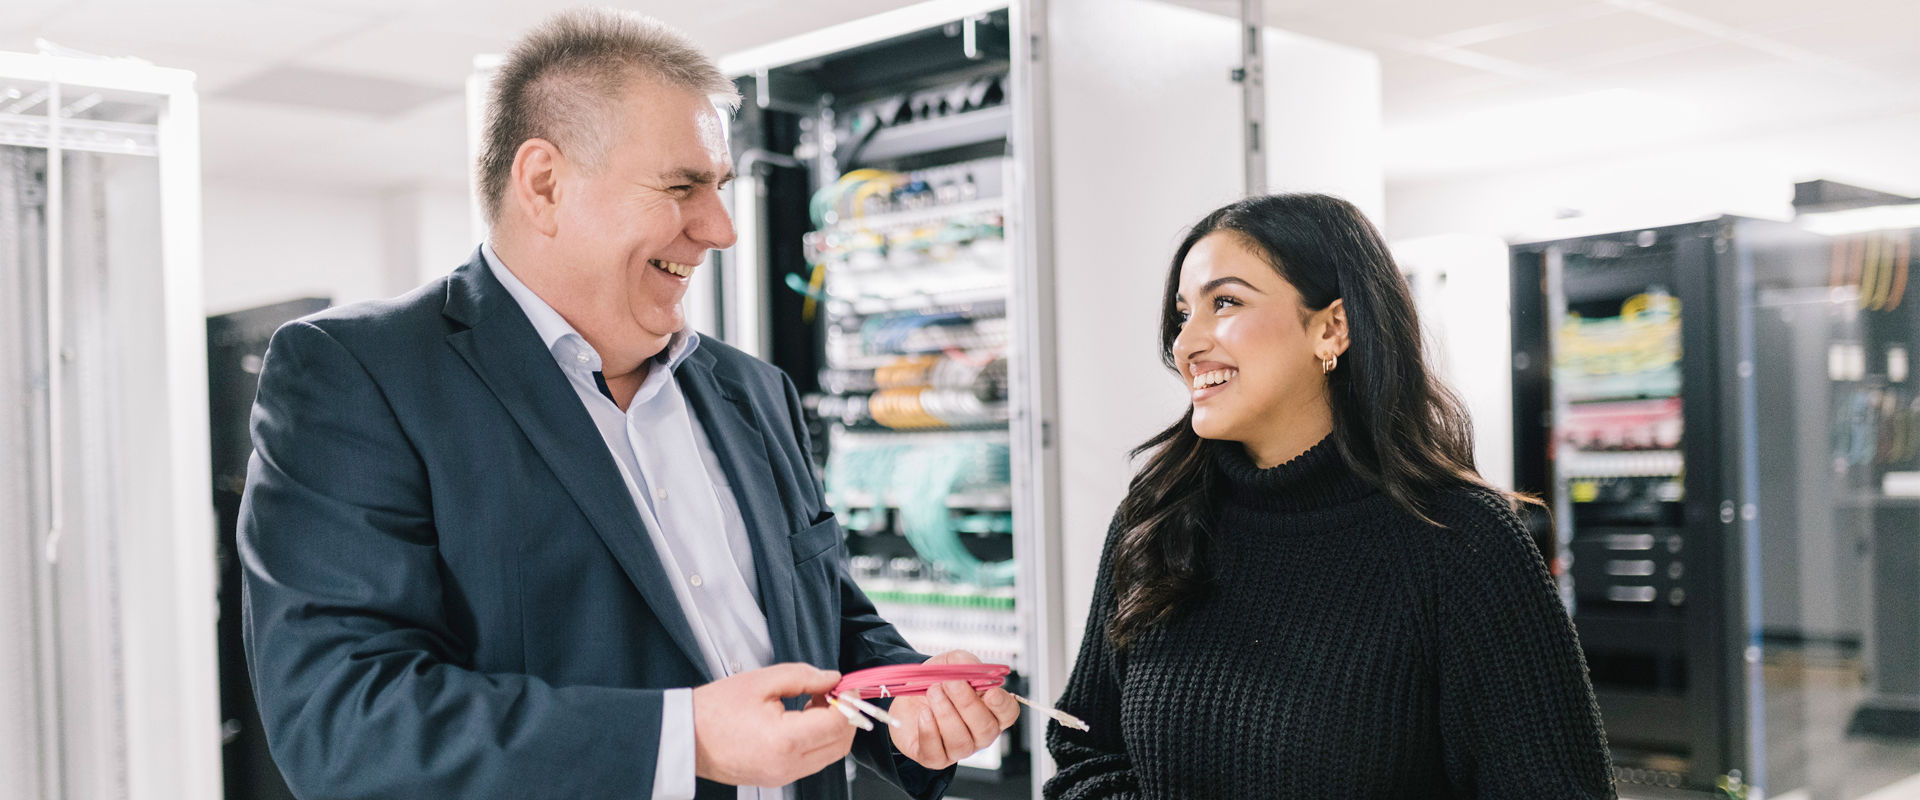 Two smiling people in the server room, man holding a pink fiber optic patch cable.